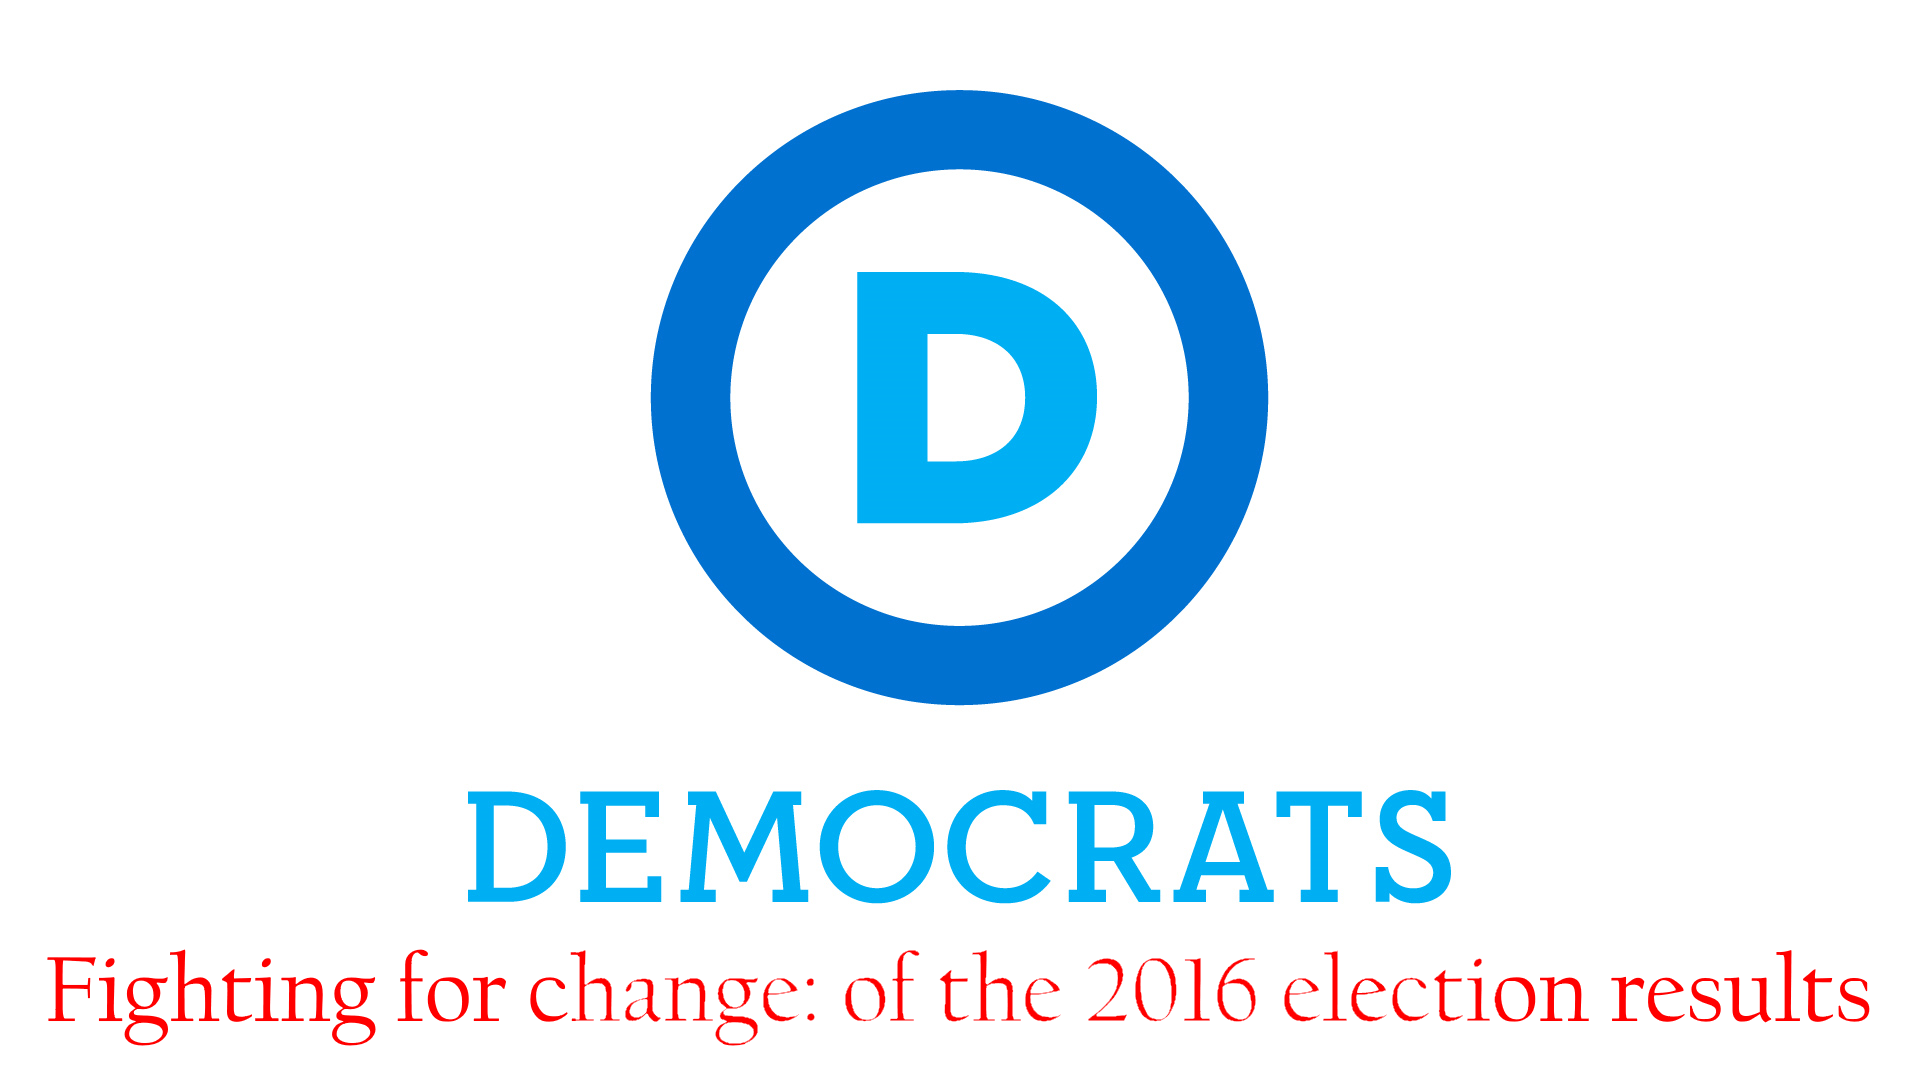 DNC Logo - BREAKING: The DNC has just put out their new logo for the 2018, 2020 ...